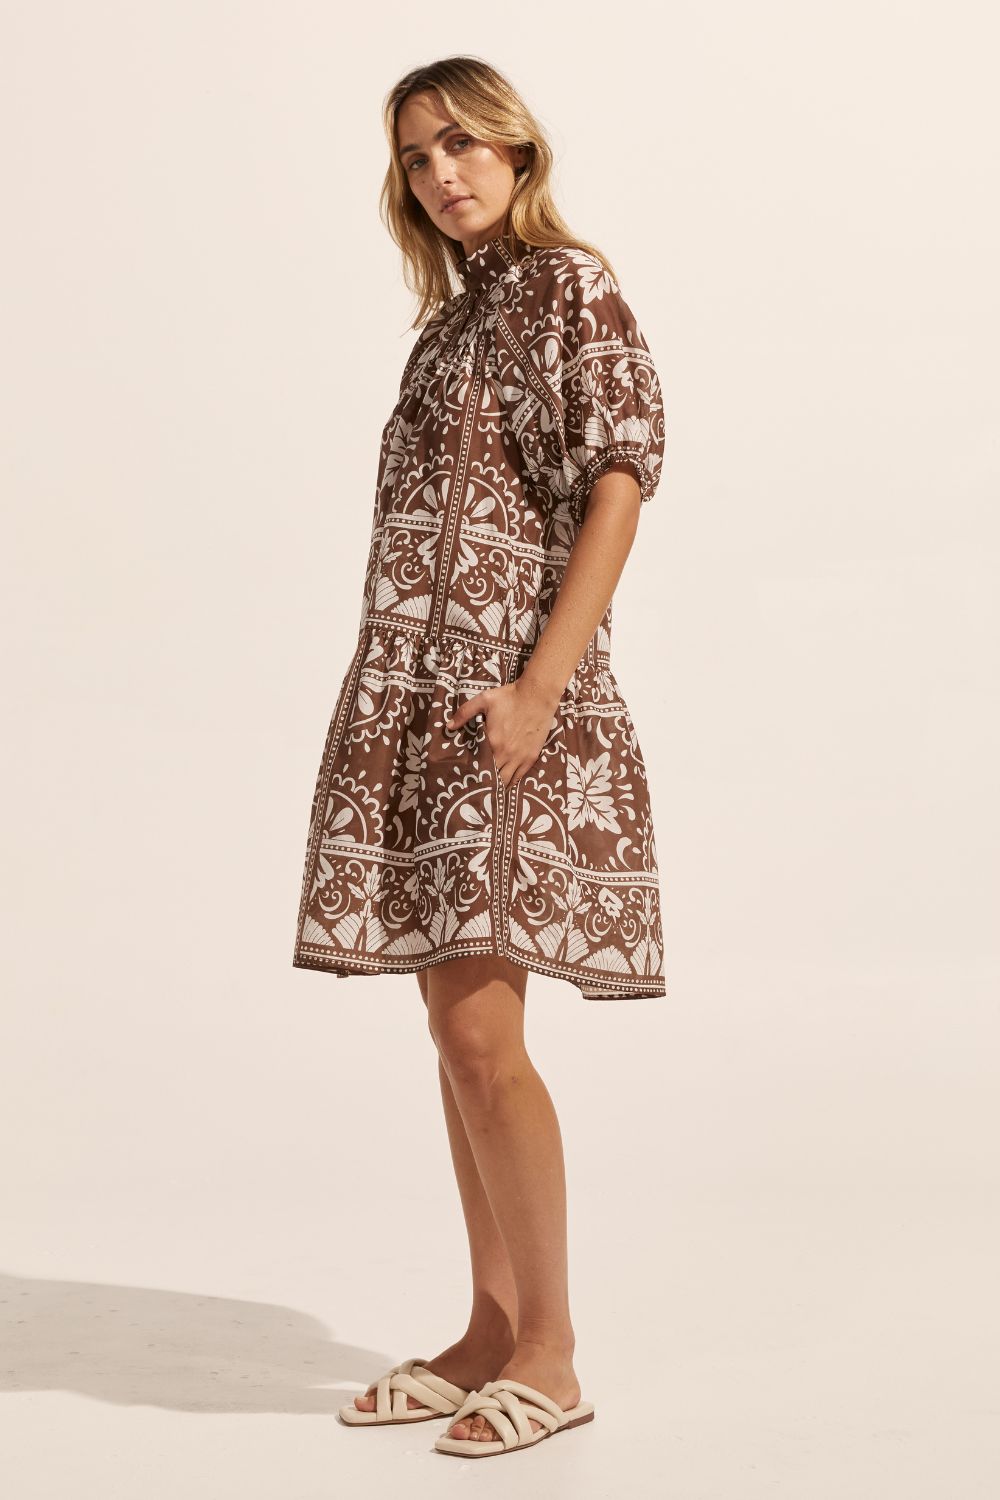 brown and white print, high neck, buttons to waist, mid length sleeve, dress, drop waist, side image